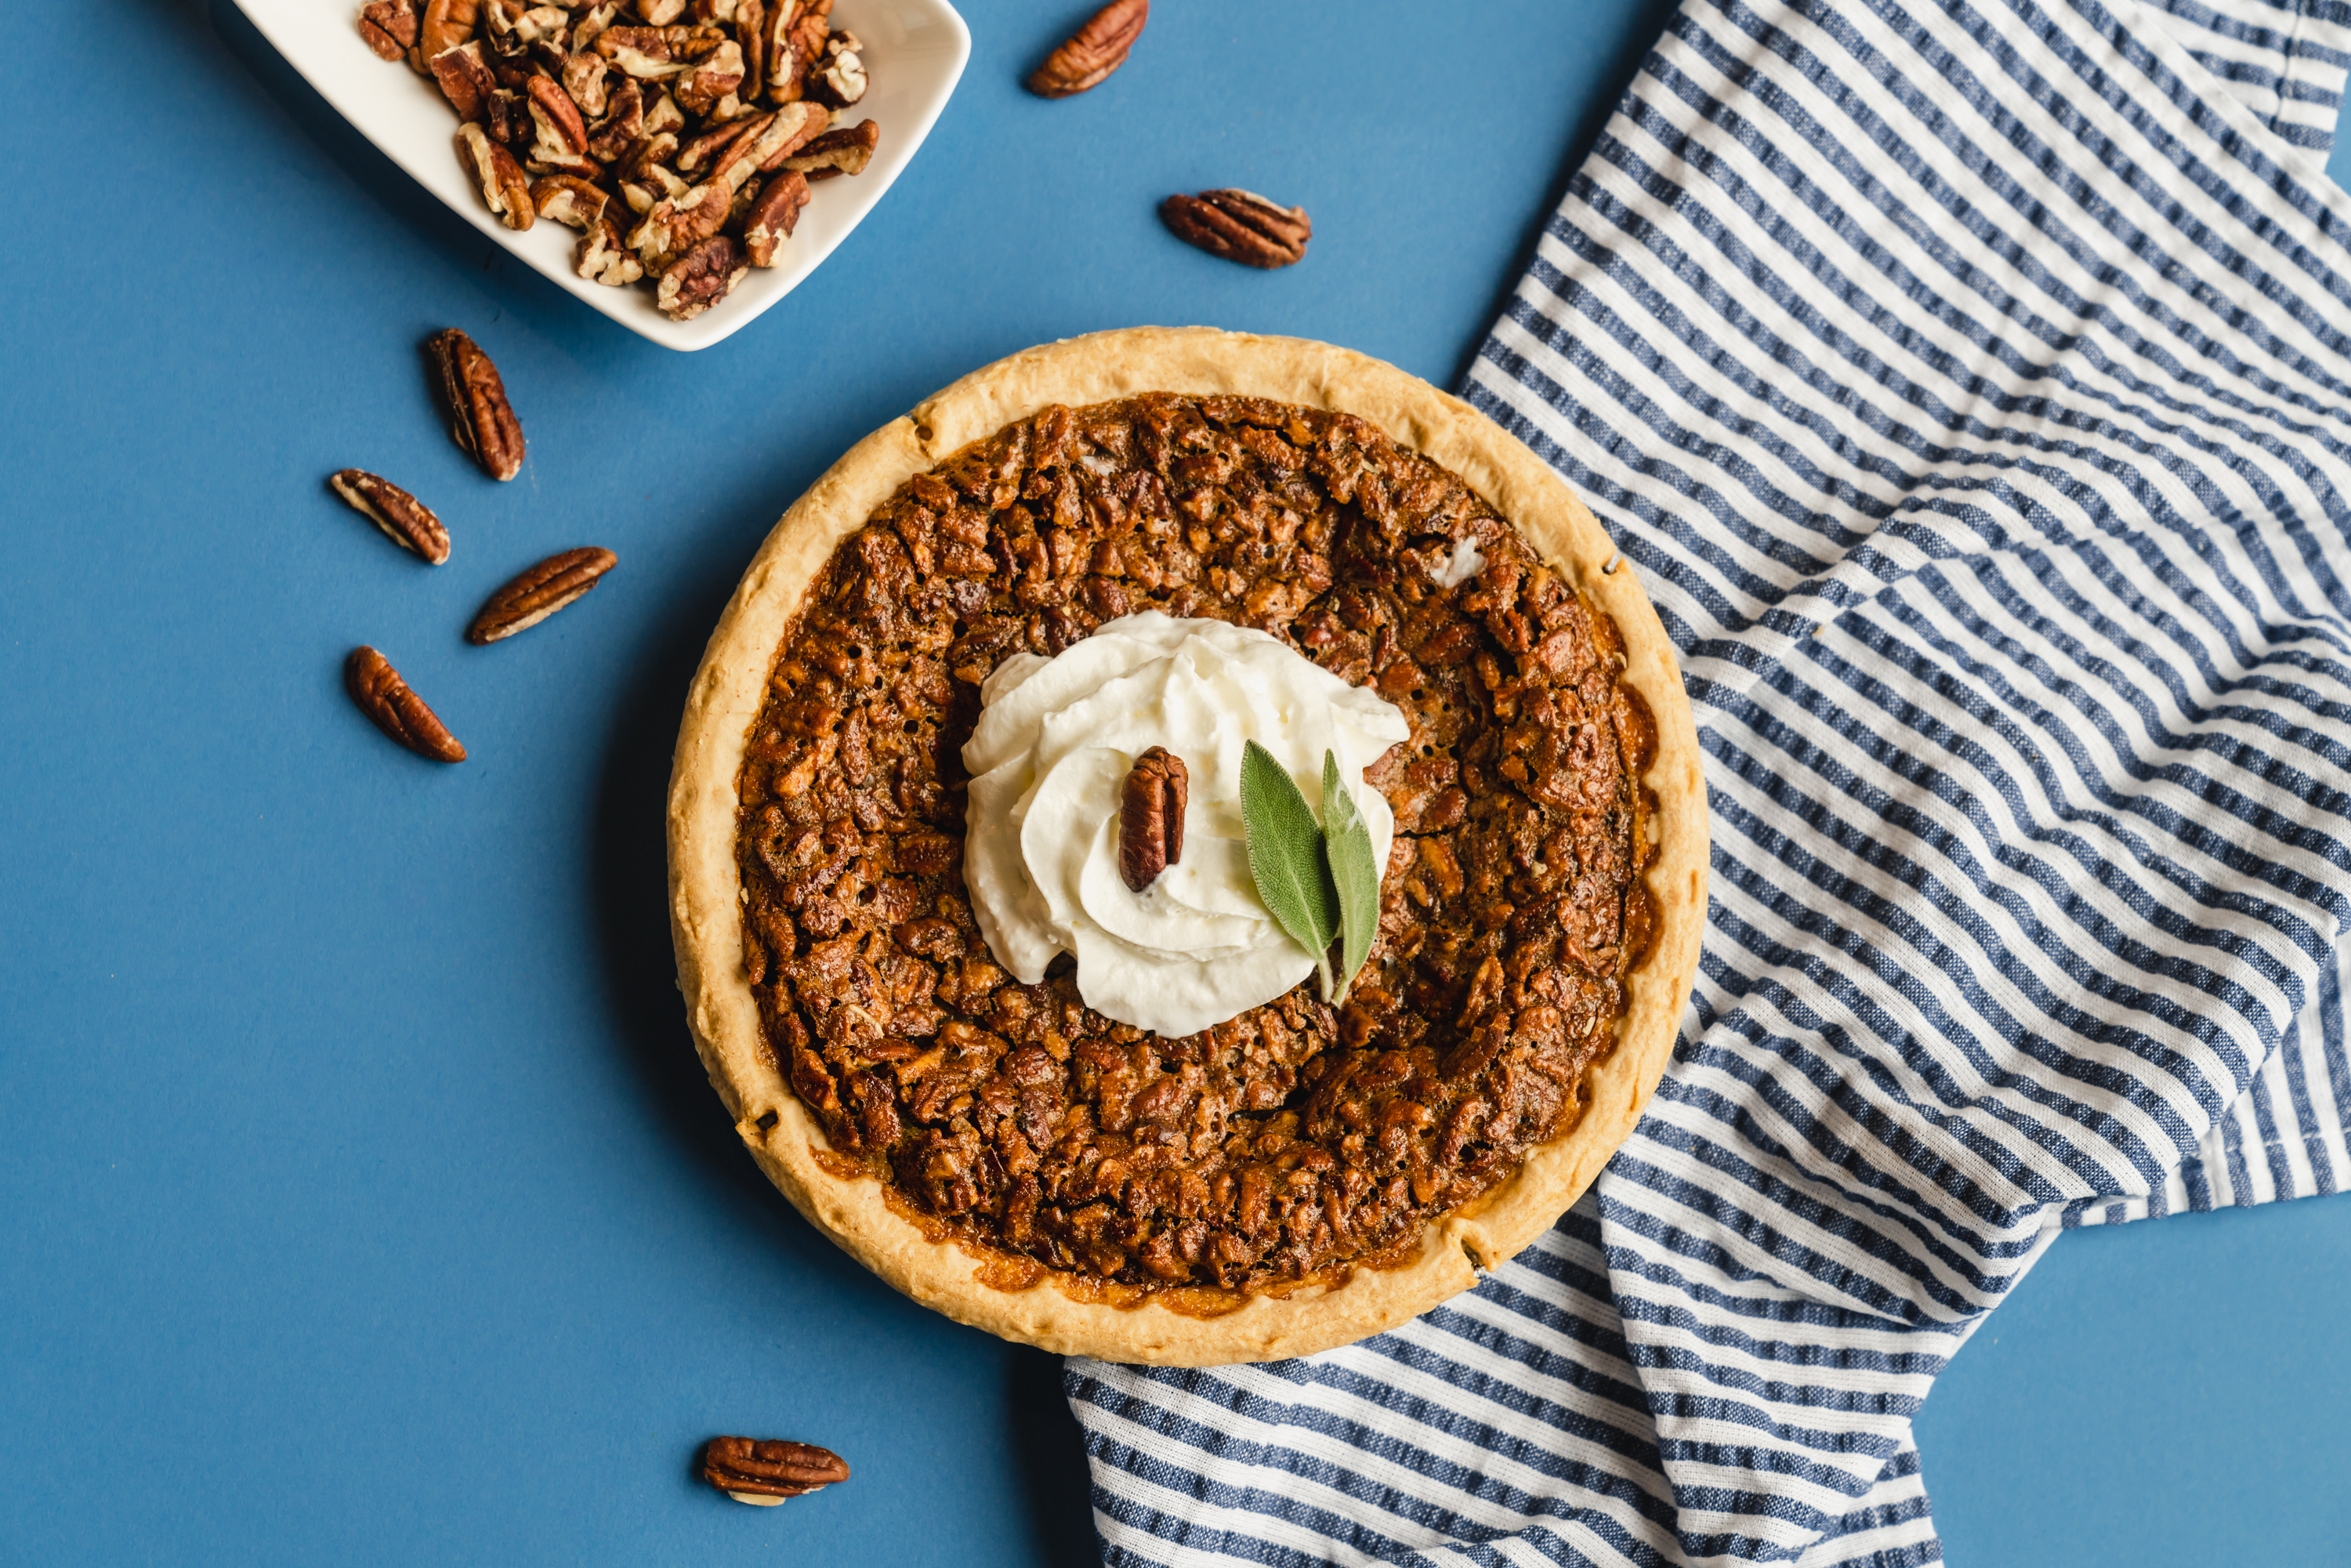 Full pecan pie with whipped cream seen from above on a blue table.